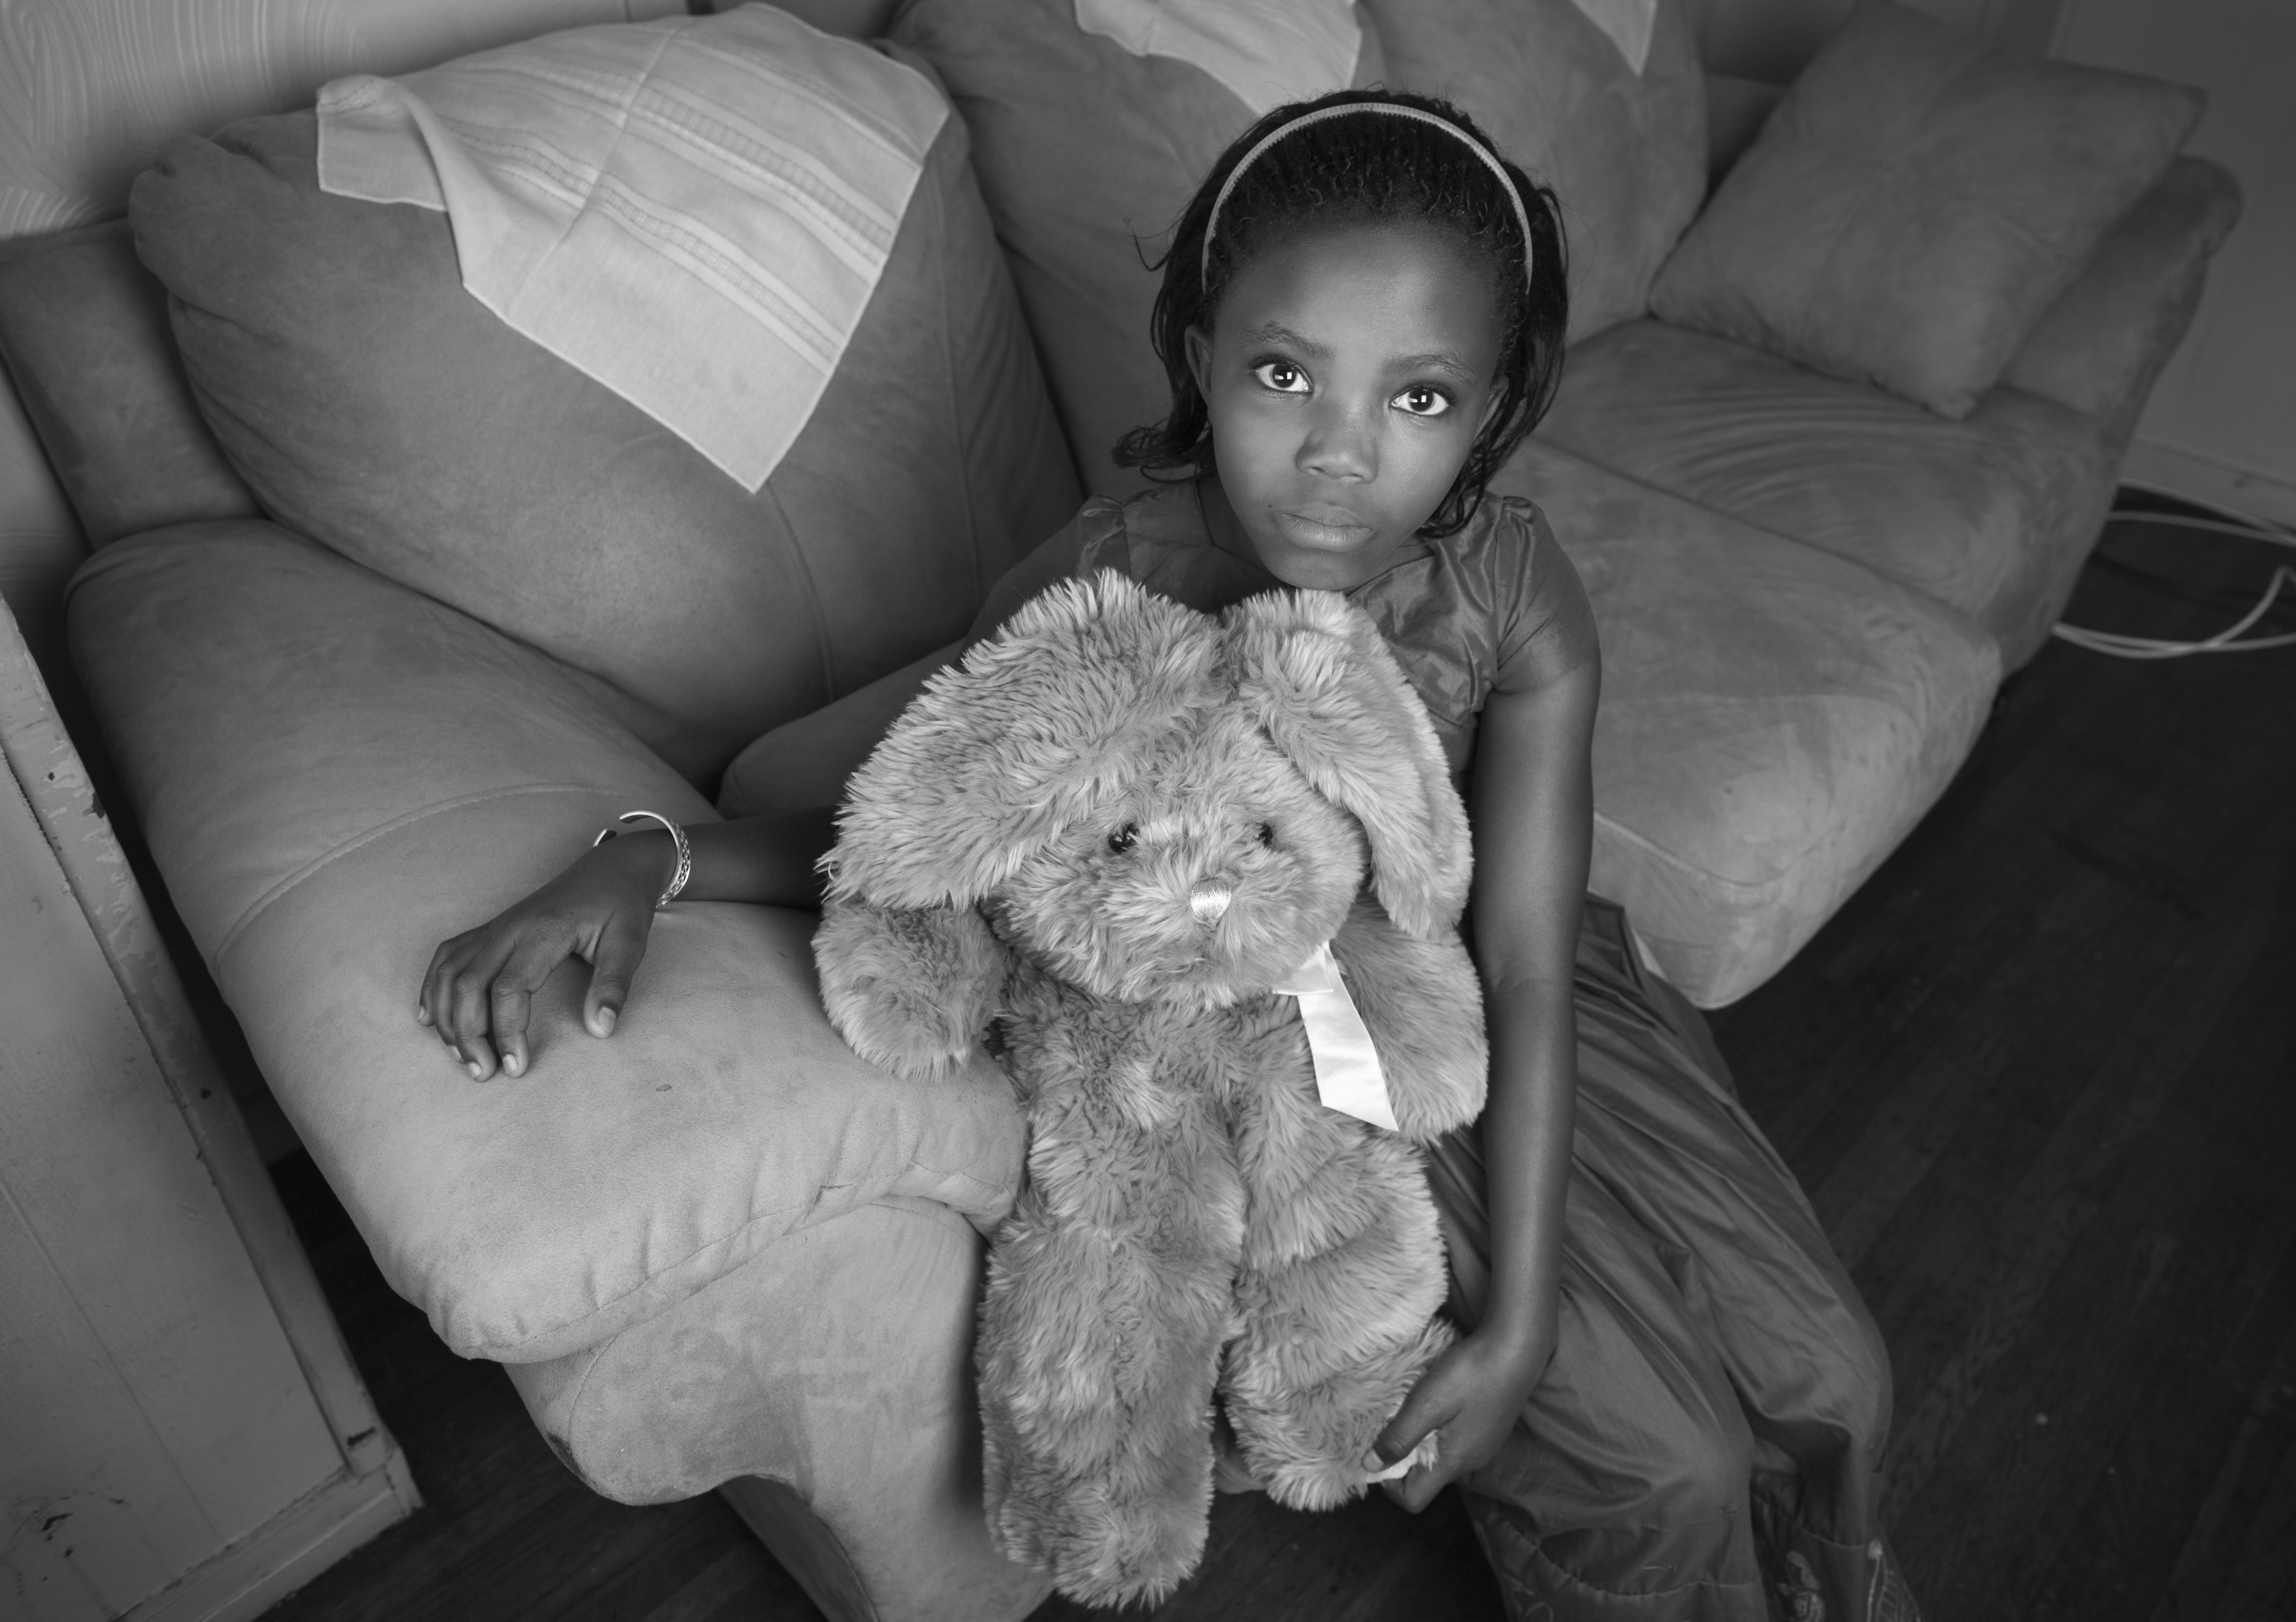 Nyota Kamali, 8, is a refugee from the Democratic Republic of Congo who recently arrived in the United States and moved into an apartment with her family in Rochester, NY. Saint's Place prepared the apartment before her family moved in, providing furniture, decorations and toys. Photo by Sarah Ann Jump